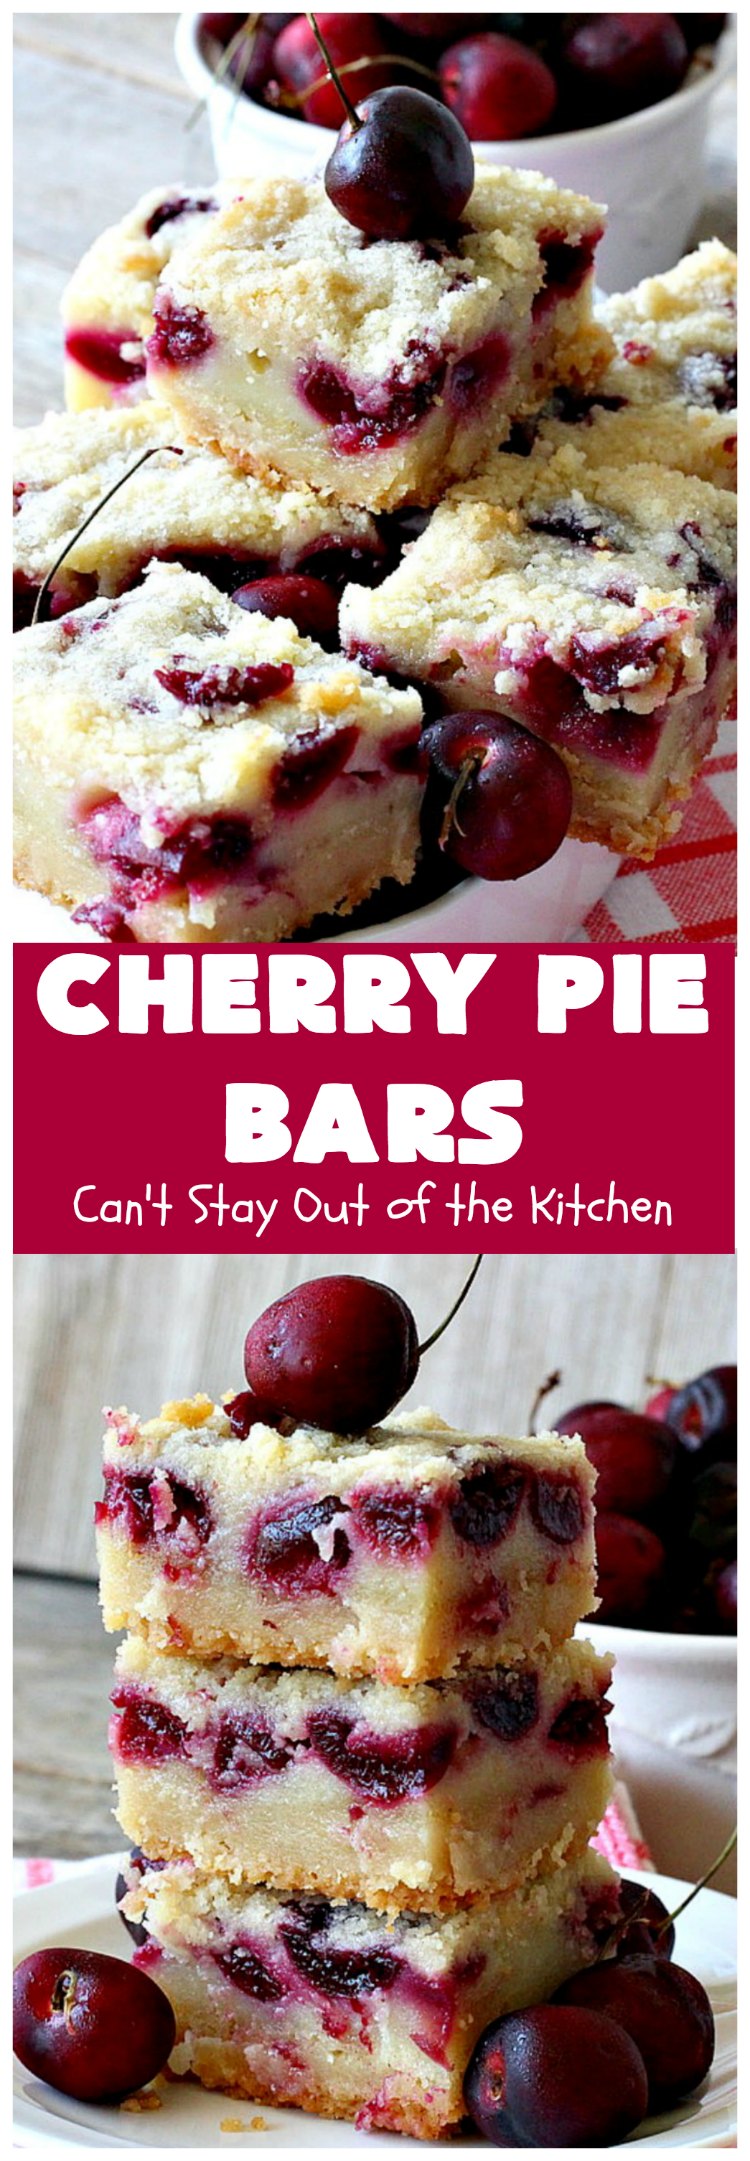 Cherry Pie Bars | Can't Stay Out of the Kitchen | These spectacular #cookie-type bars have the taste of #cherrypie without all the work! They're fantastic for summer potlucks when fresh #cherries are in season. #dessert #cherrydessert #Canbassador #NorthwestCherryGrowers